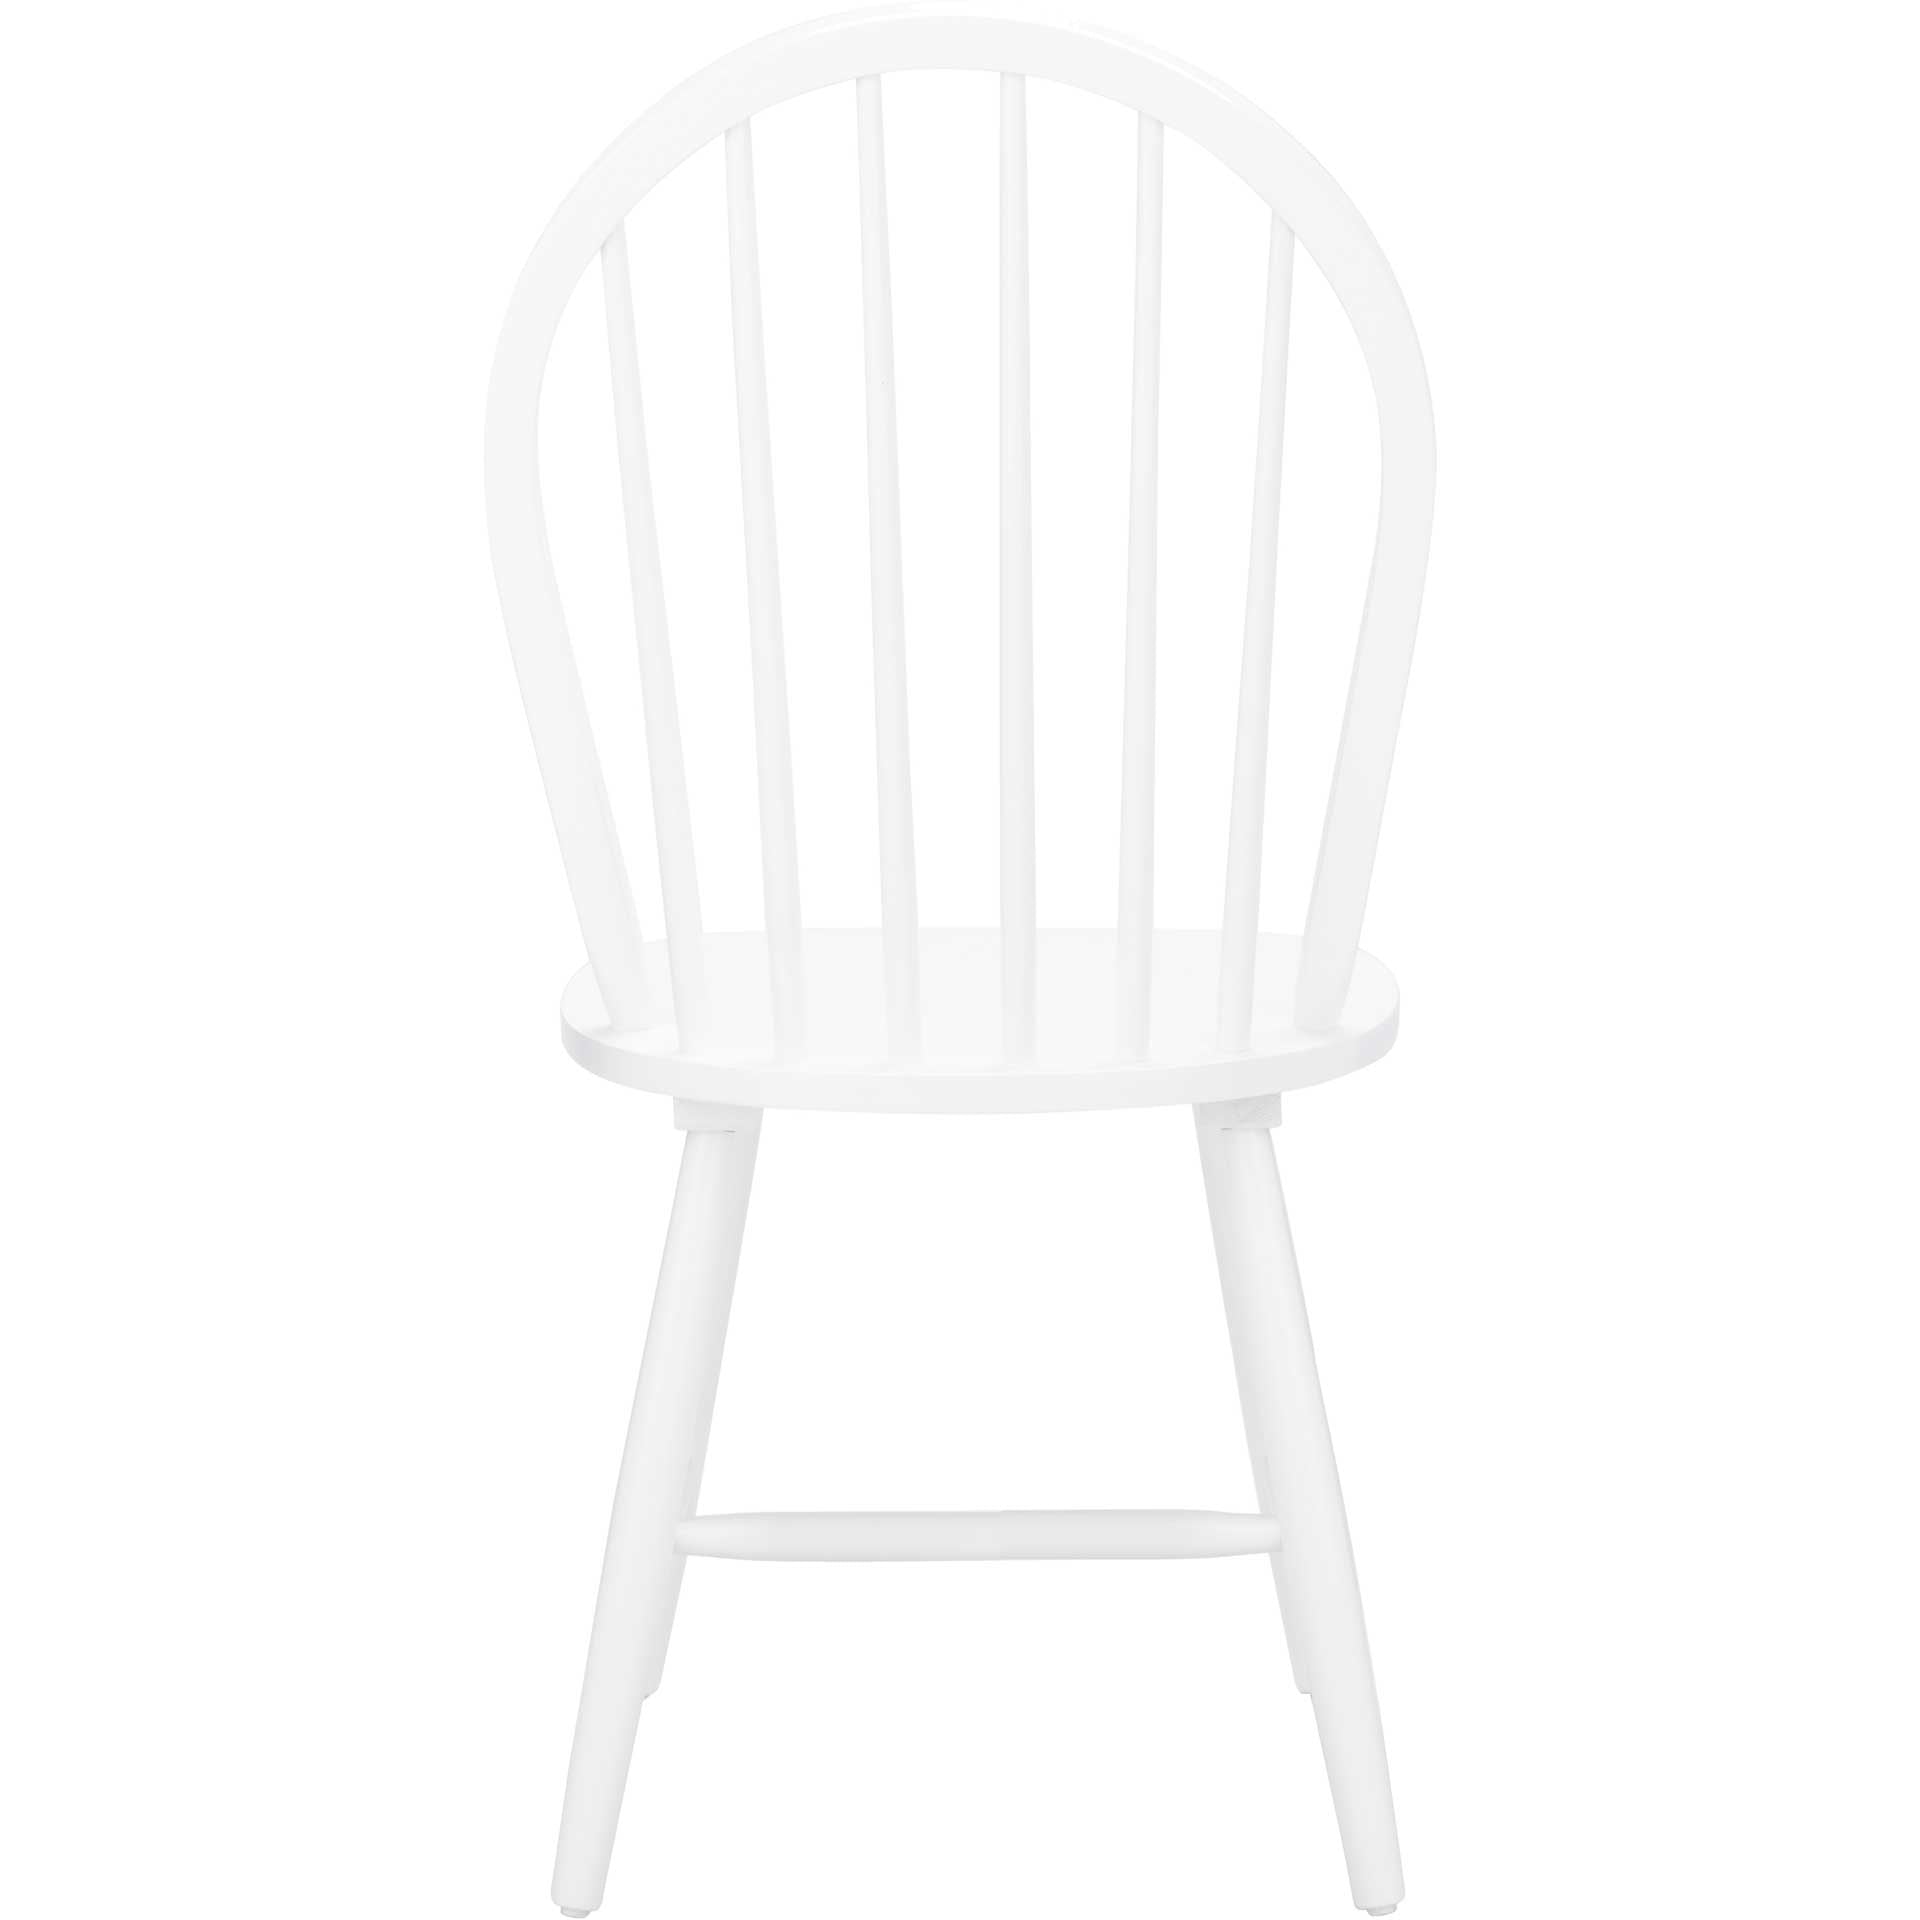 Calista Spindle Back Chair White (Set of 2)